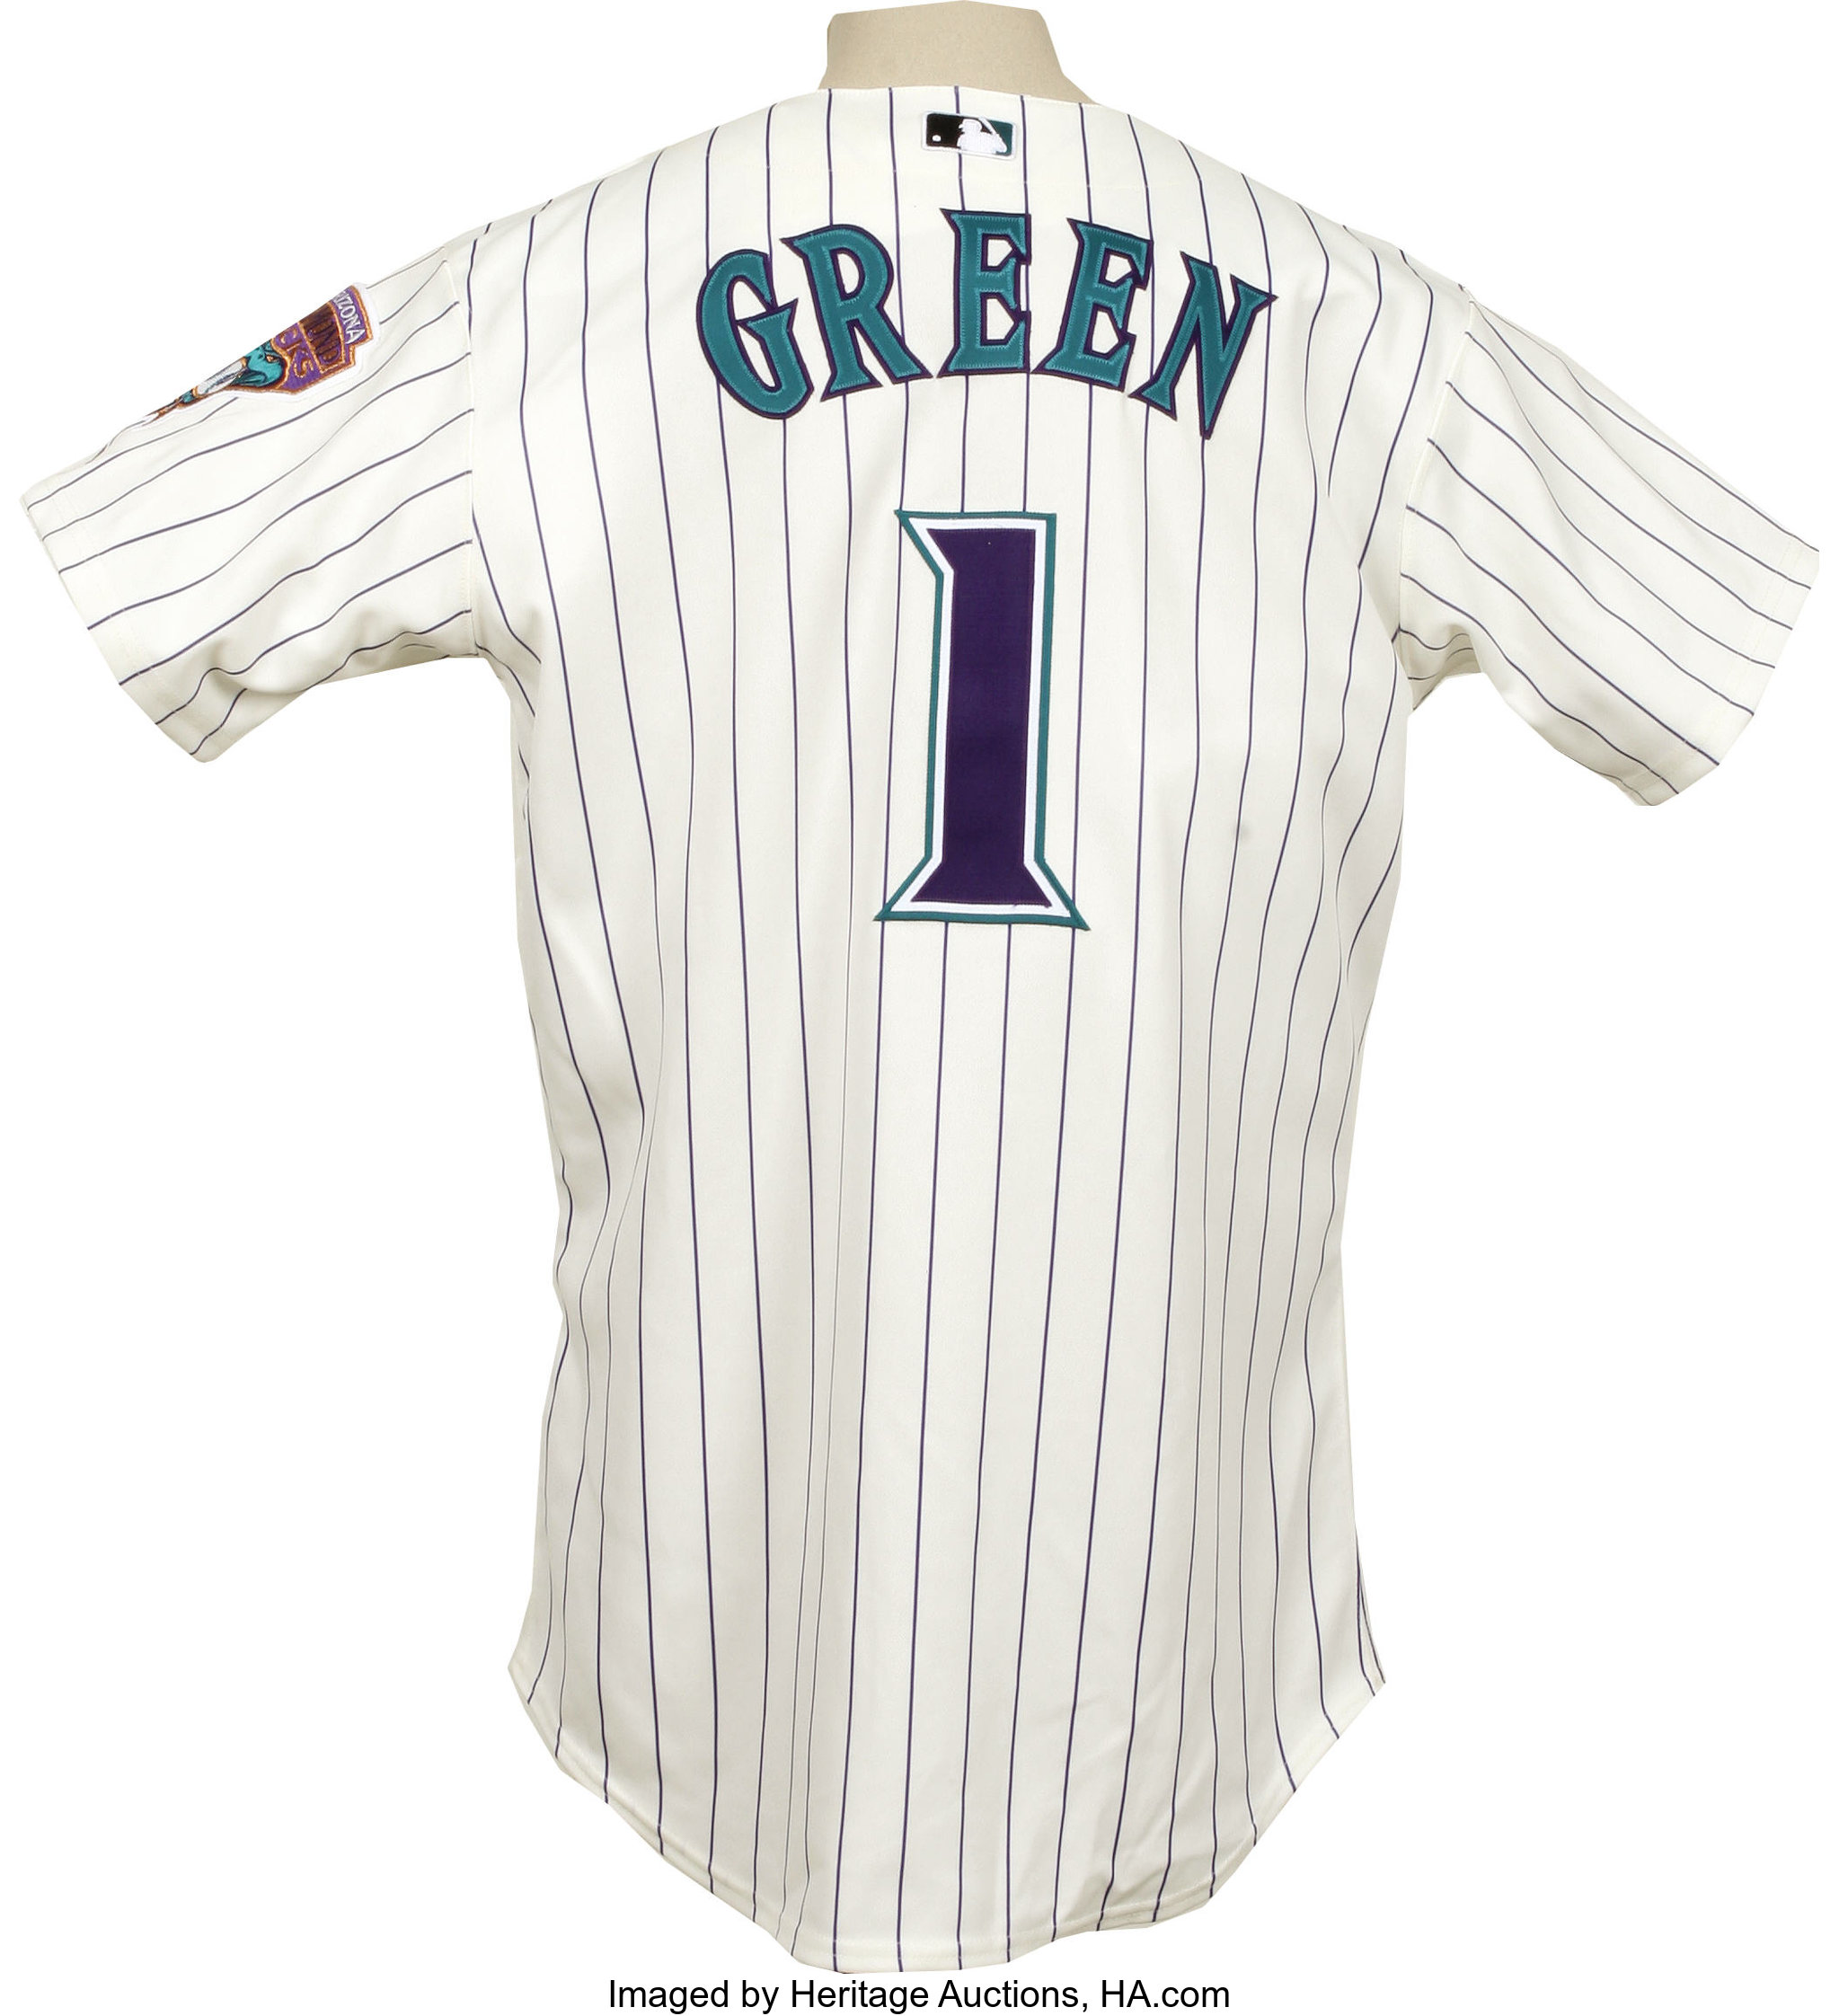 2004-05 Andy Green Game Used Jersey. Recent gamer from the archives, Lot  #12508